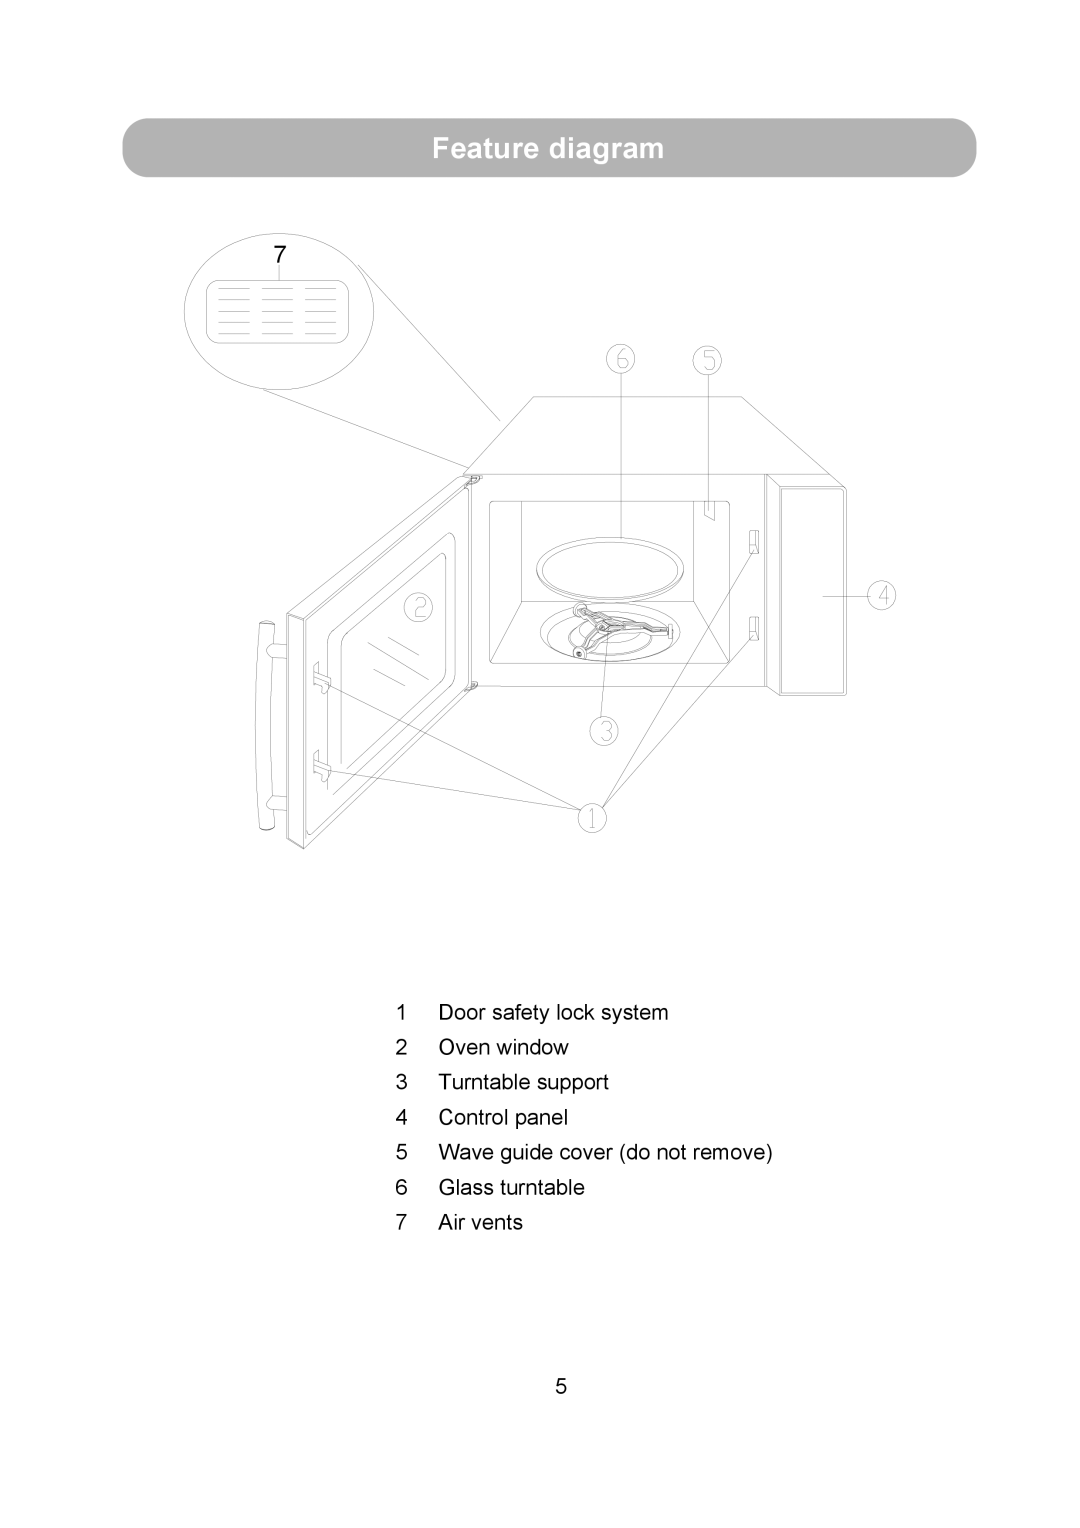 Russell Hobbs RHM1712 user manual Feature diagram, Door safety lock system 2 Oven window 3 Turntable support, Air vents 